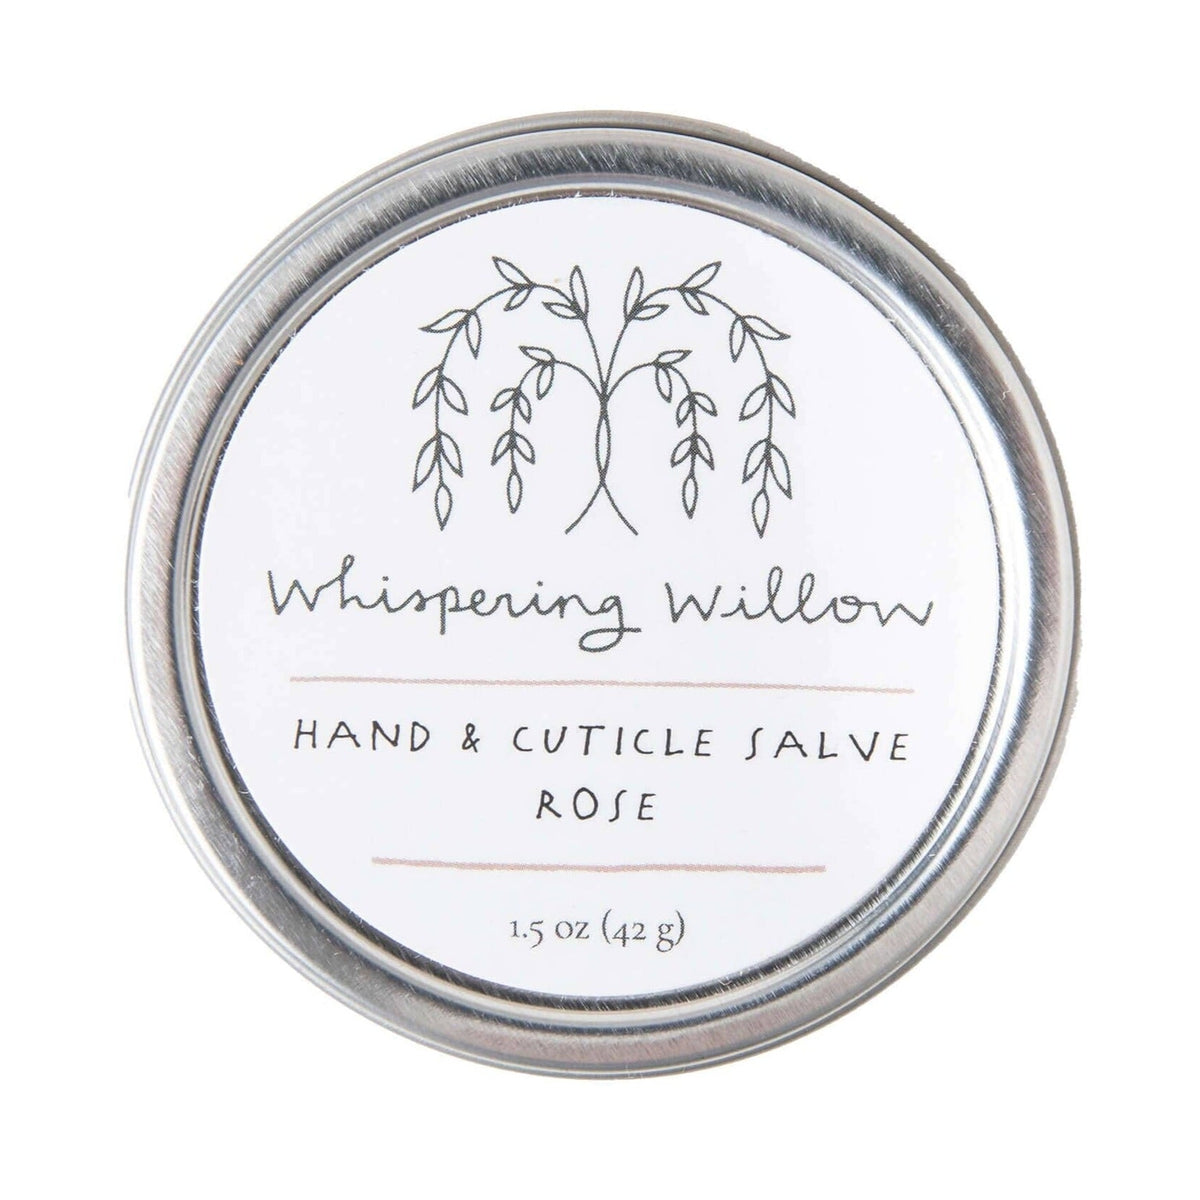 Hand & Cuticle Salve - Rose - Gift & Gather